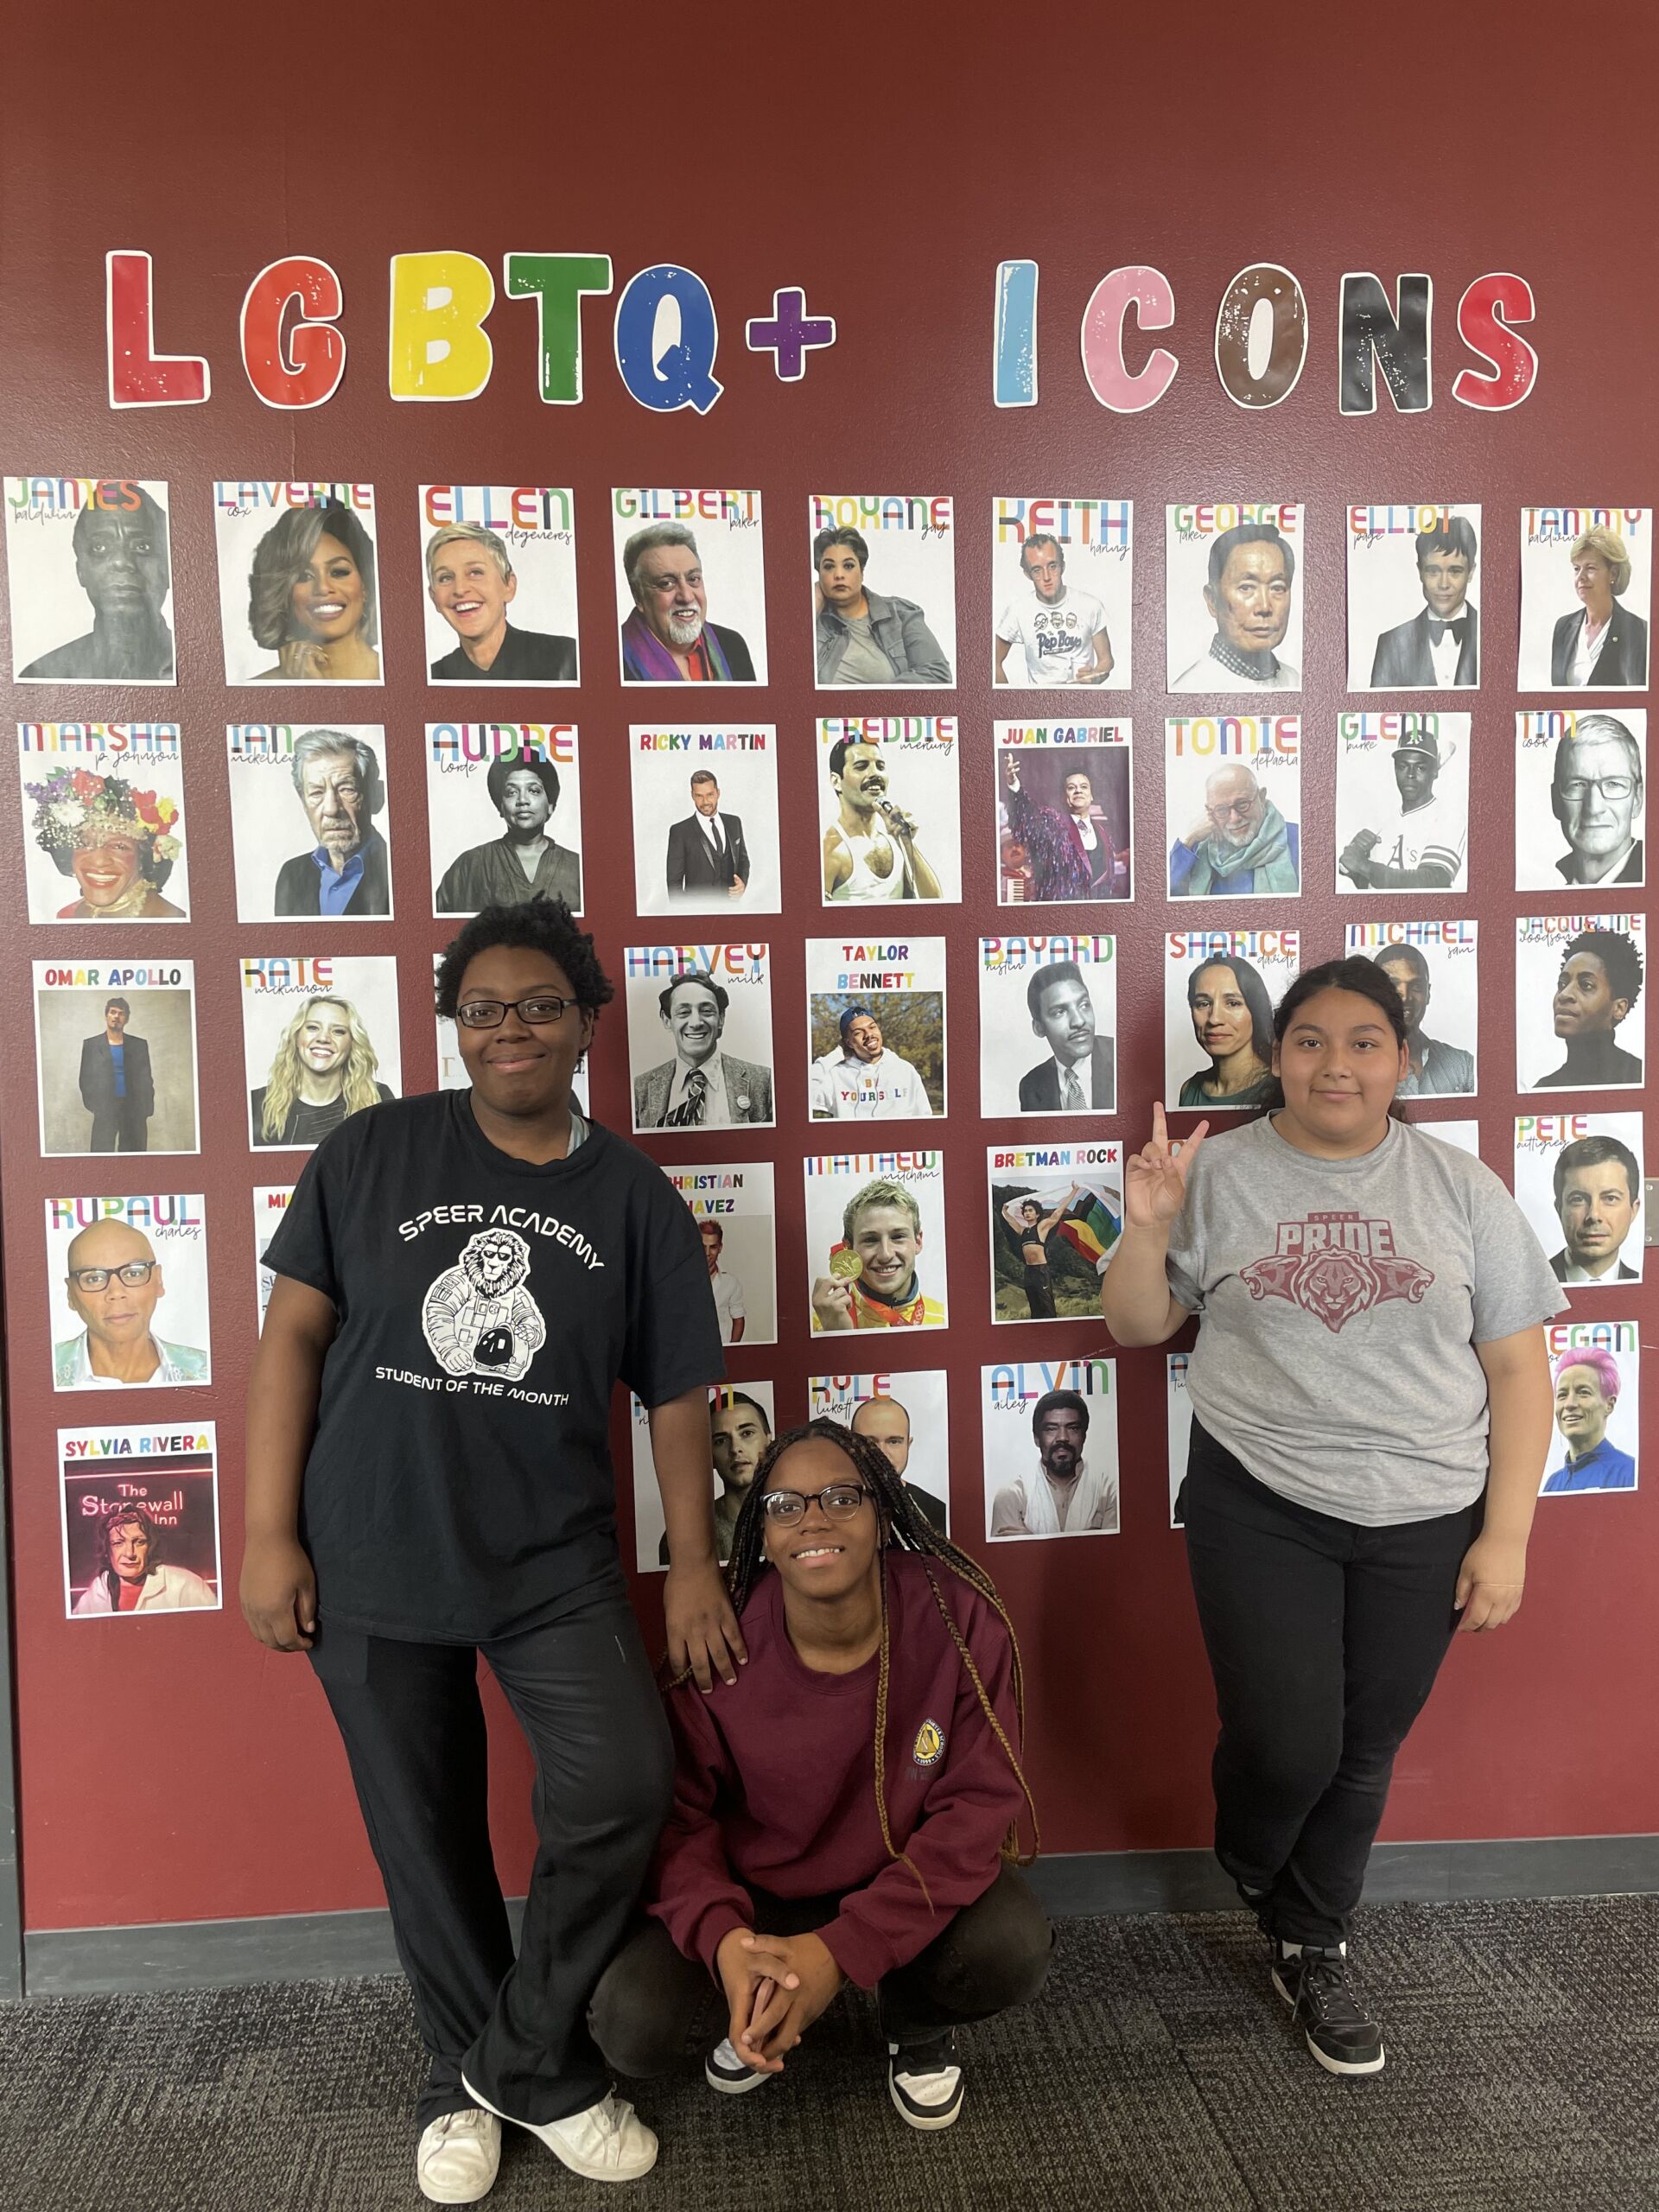 Three students at ITW David Speer Academy pose in front of the finished LGBTQ+ Icons wall decoration. The student standing on the left is a young Black student with short dark brown hair and they are wearing a graphic t-shirt and black pants. To their right, sitting on the ground, is another young Black student with a long sleeved Speer sweatshirt and black pants on. The student standing on the right is a young Latine person with a gray Speer t-shirt and black pants. They are throwing up a peace sign.